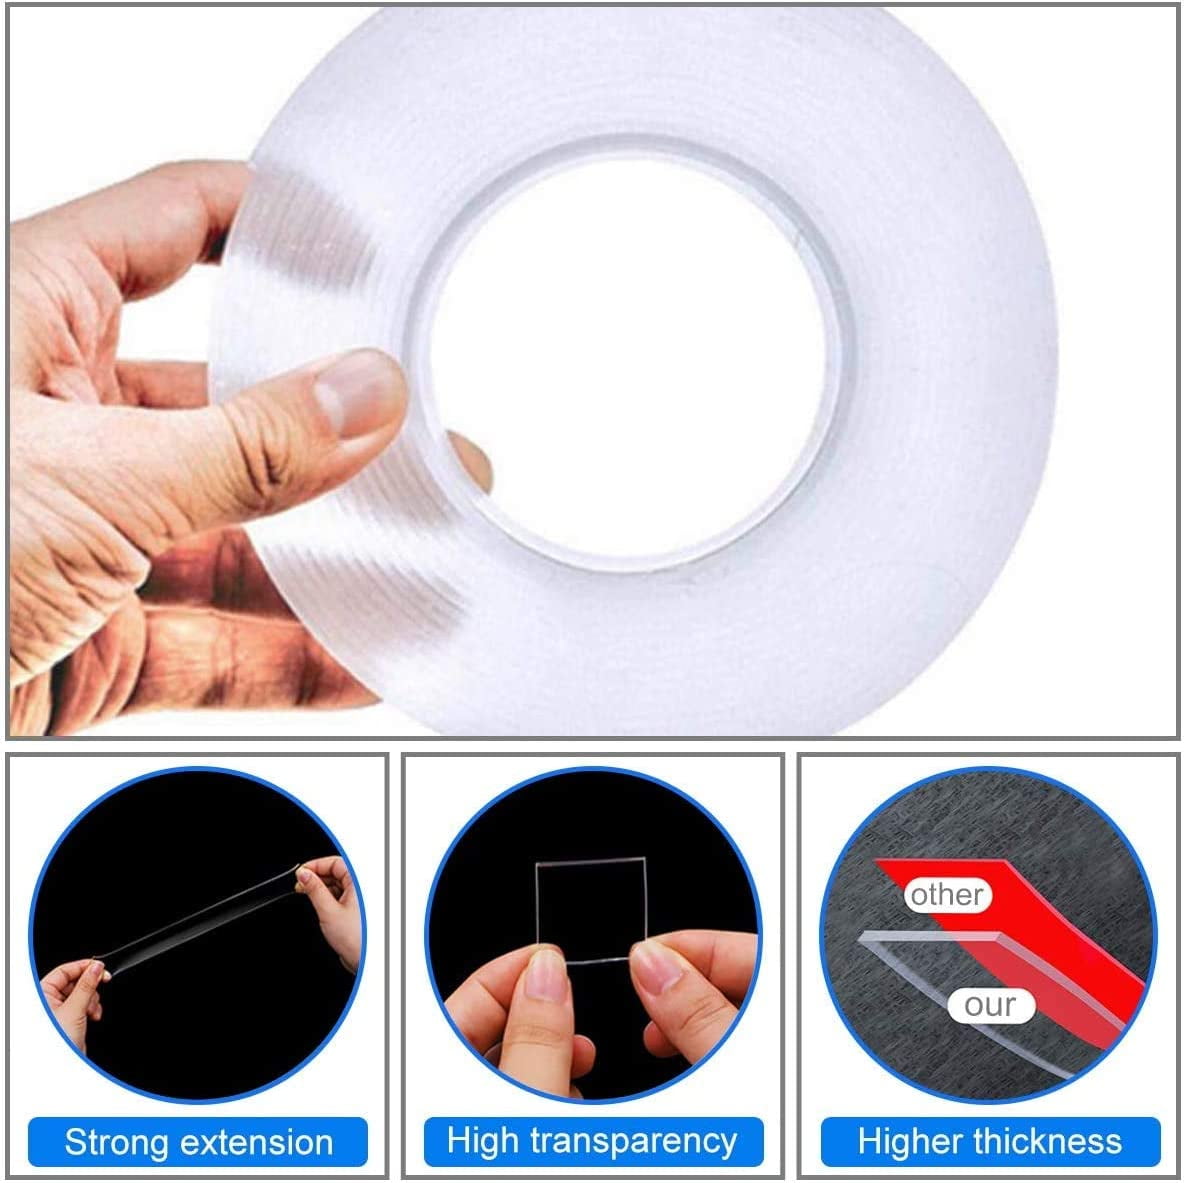 2-10M Double Sided Adhesive Tape Heavy Duty Transparent Washable  Ultra-strong Two Sided Mounting Tape Strips for Decoration